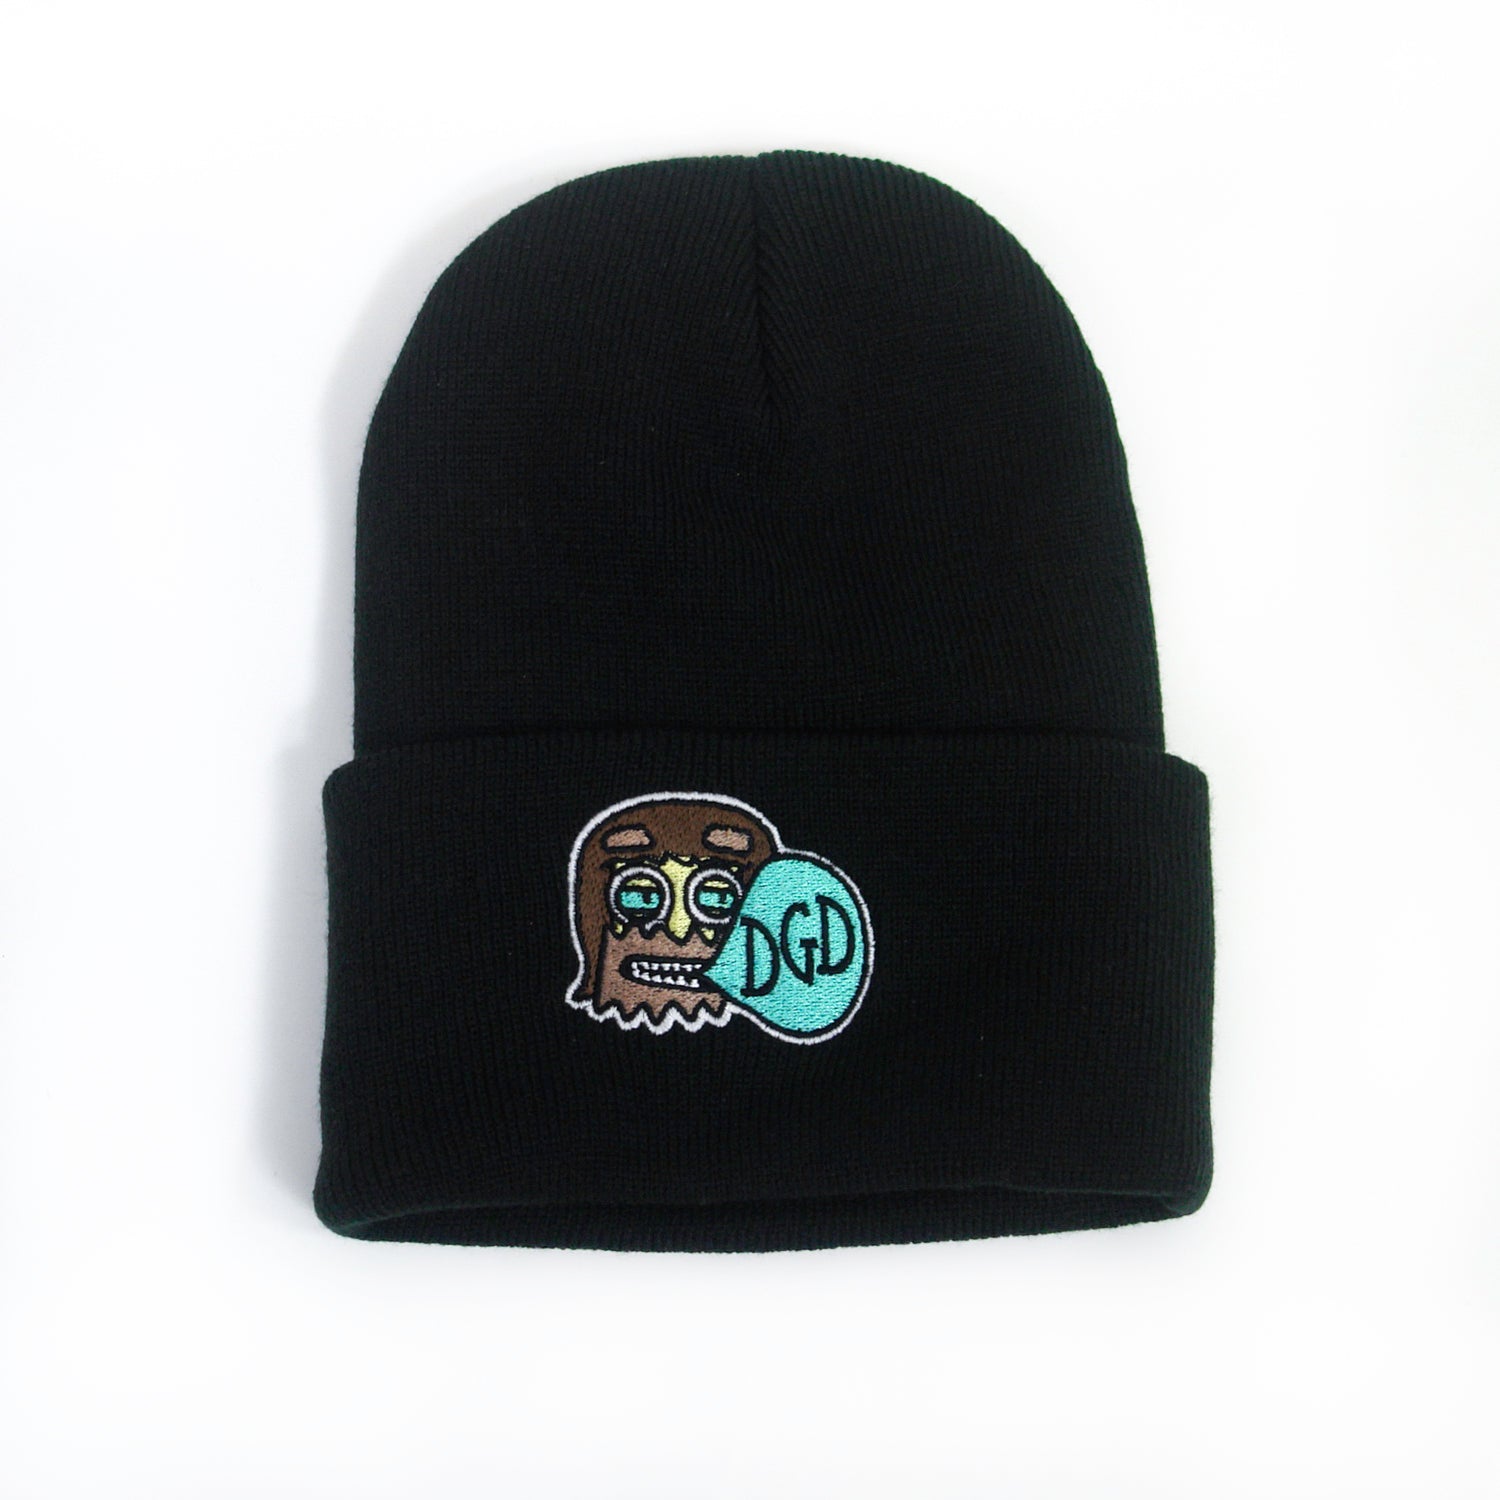 image of a black winter beanie on a white background. beanie has embroidery on the front cuff of the robot with human hair head and a text bubble that says D G D